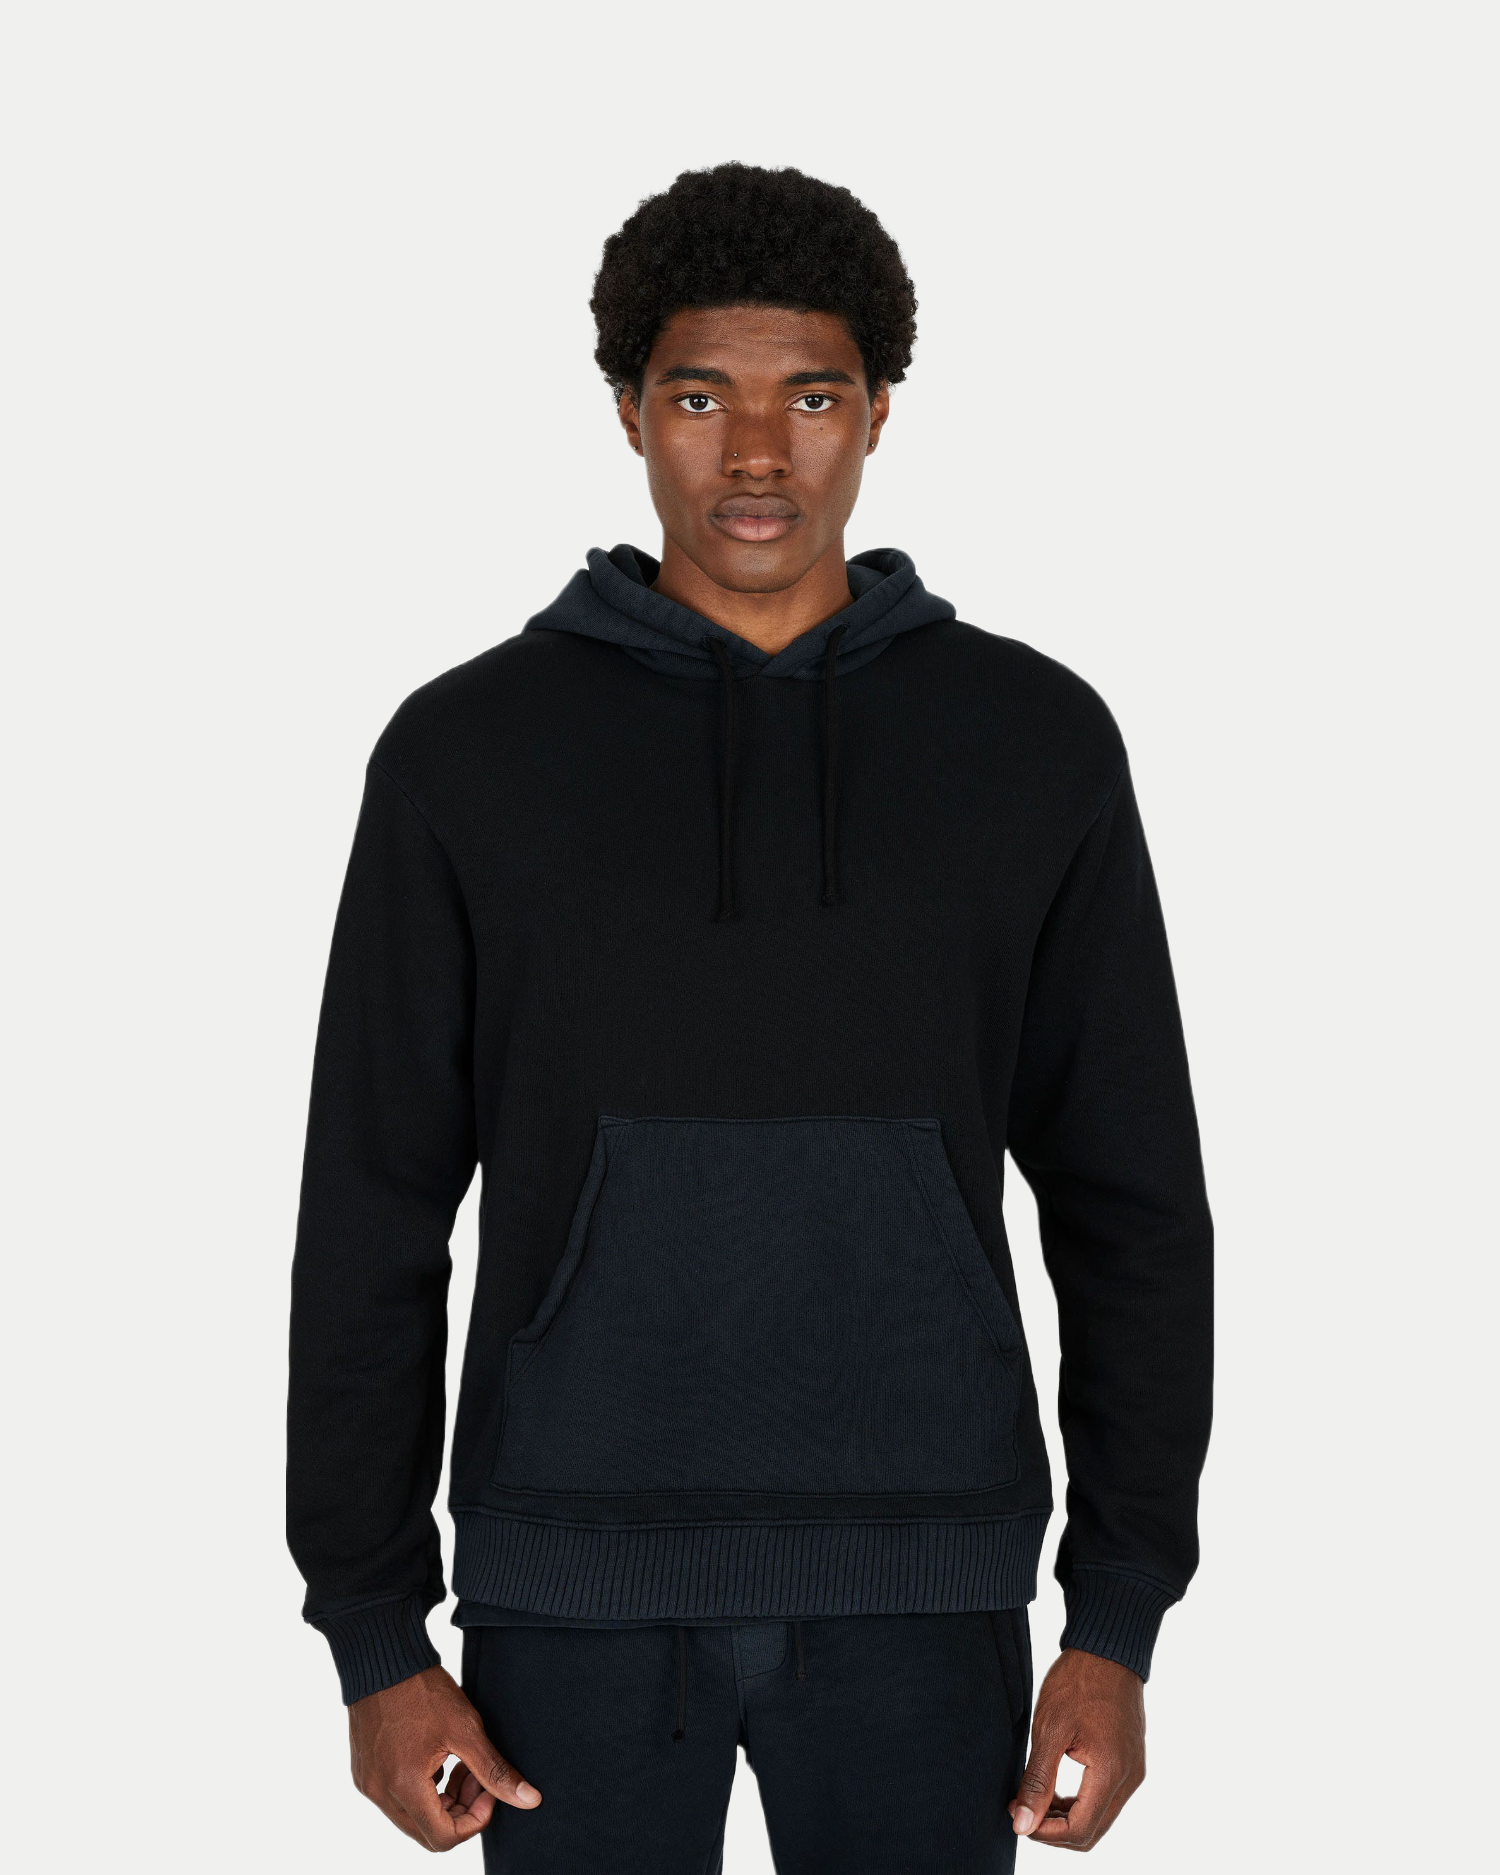 Boogie Down Bronx Reflective Mid Weight Pullover Hoodie Black / XXX-Large